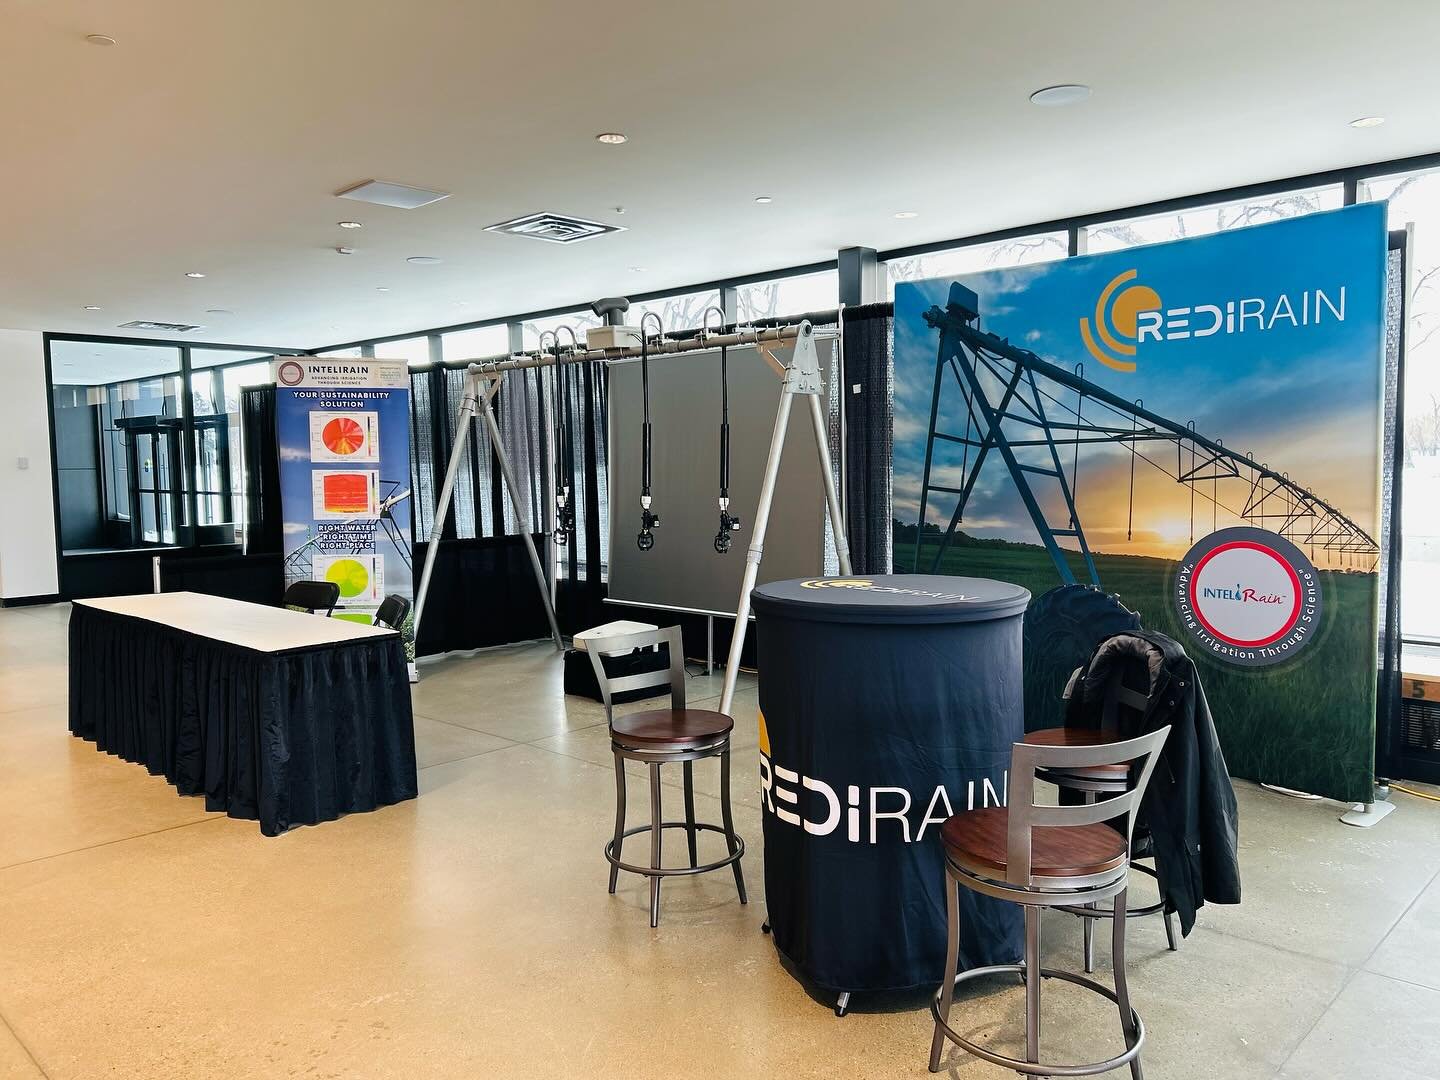 Come visit us at Ag Expo this week in Lethbridge and let&rsquo;s  talk Smart Irrigation! 🌾 
.
.
.
#yql #agexpo #agexpo2024 #lethbridge #redirain #smartirrigation #vriirrigation #pivotirrigation #pivotpoint #irrigation #irrigationtech #intelirain #ag